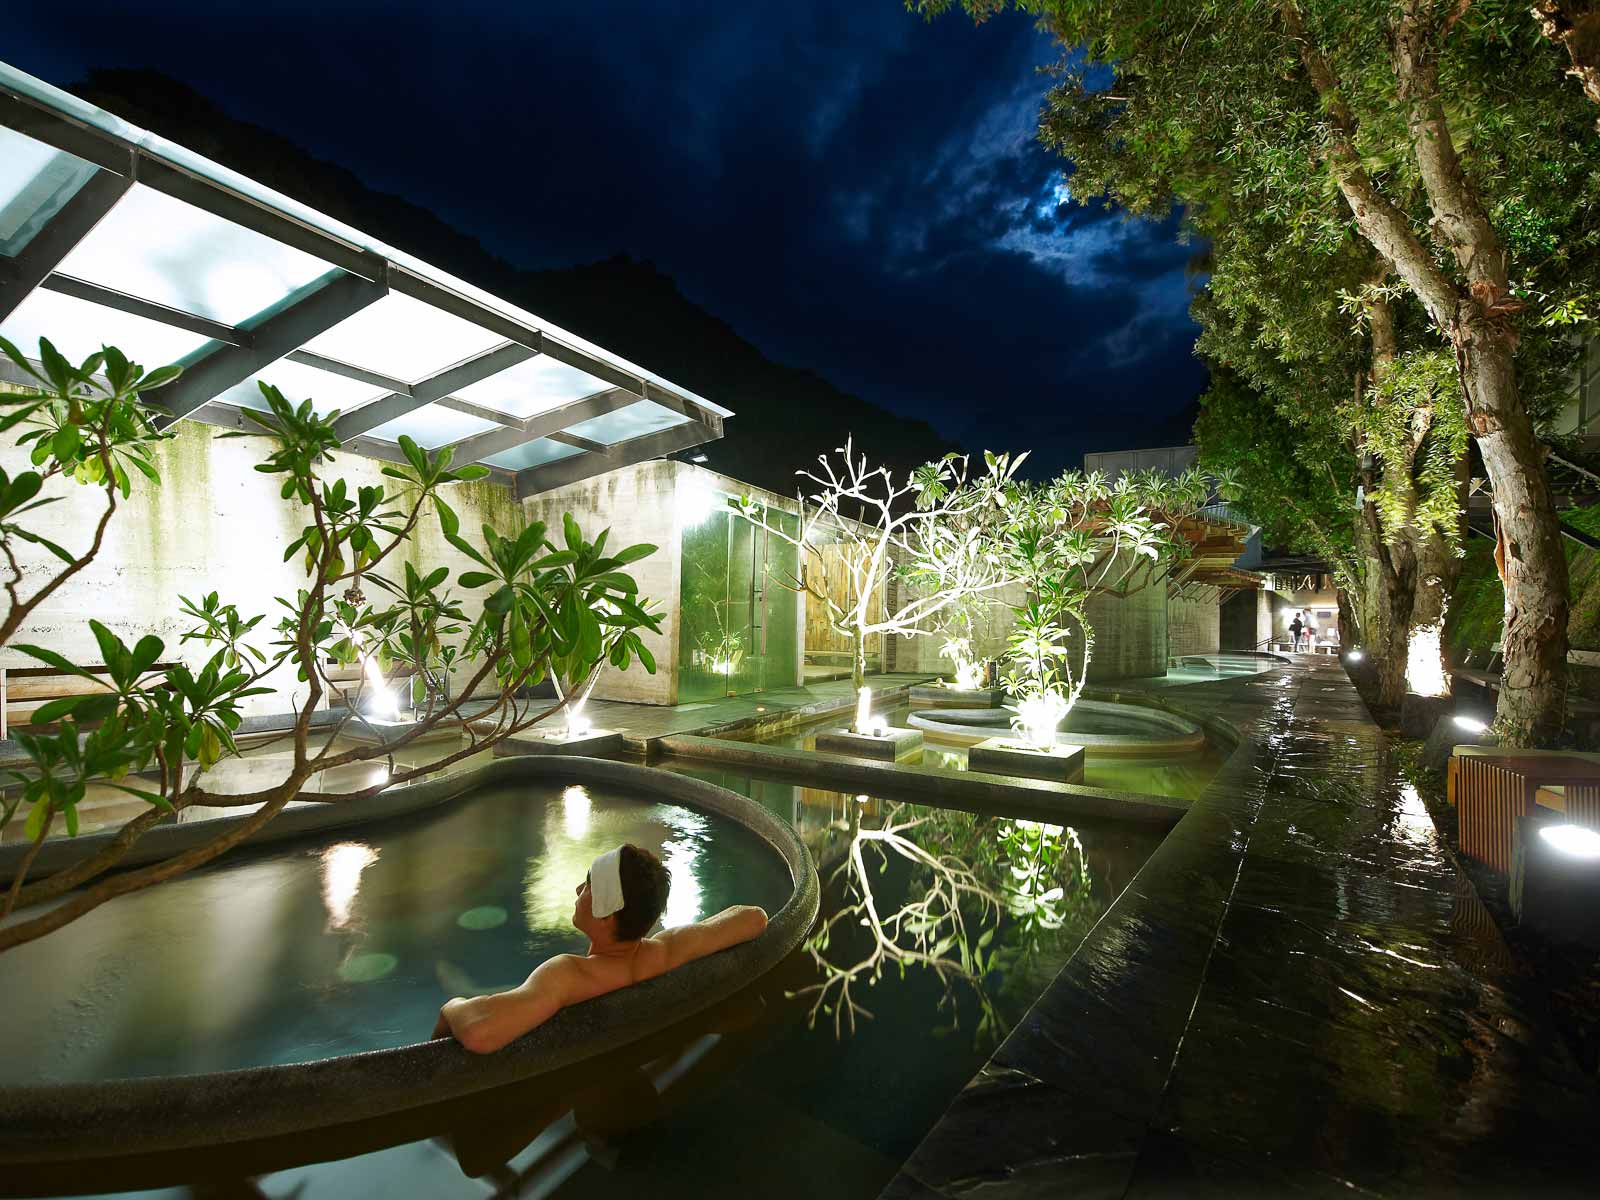 A bather soaks at night in a pool surrounded by sub-tropical plants.